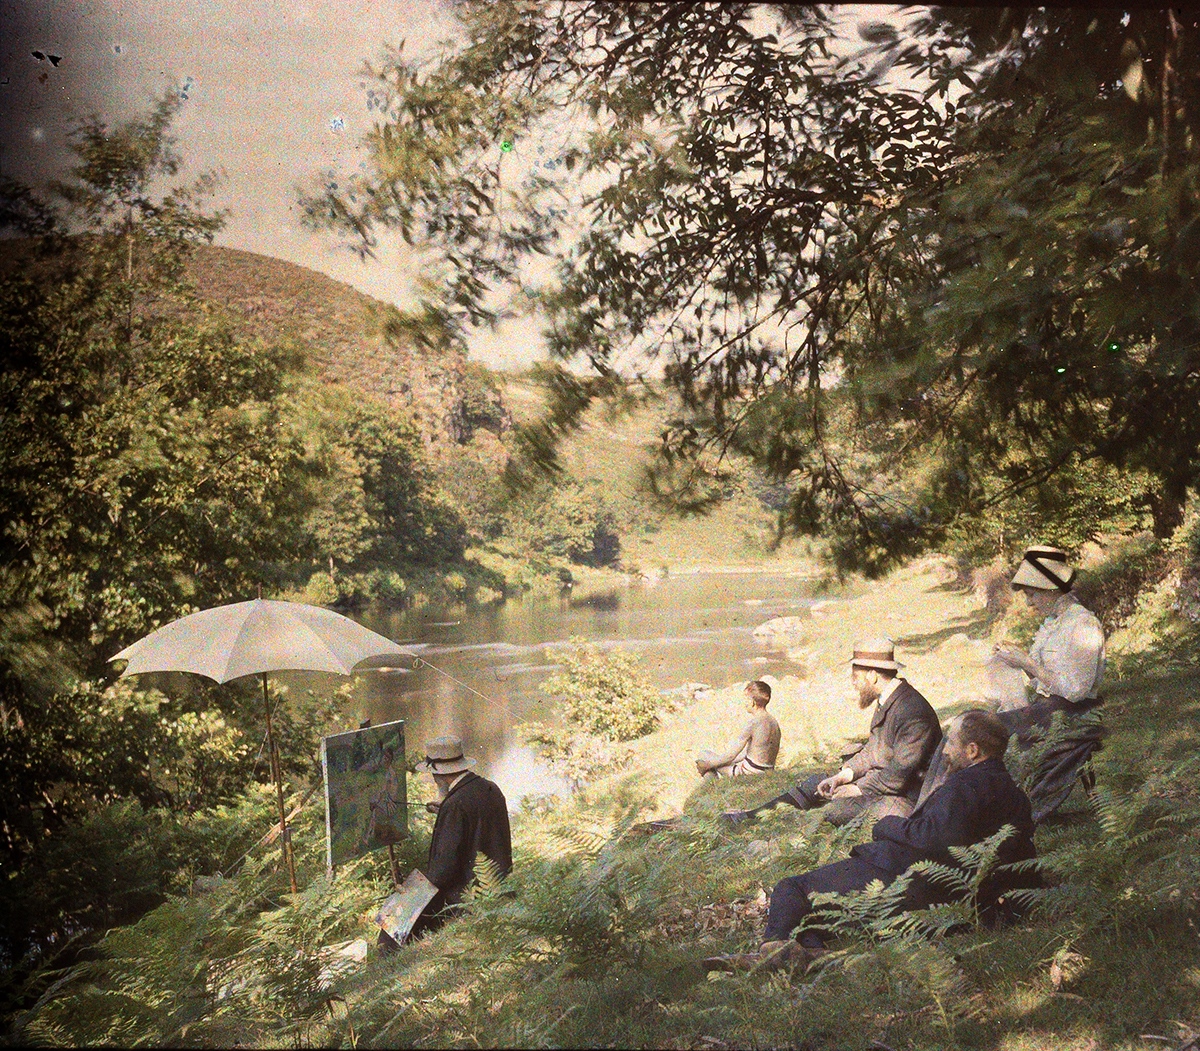 Between 1907 and 1914, art collector Antonin Personnaz (1854 – 31 December 1936) took autochrome pictures of France’s Oise Valley.jpeg